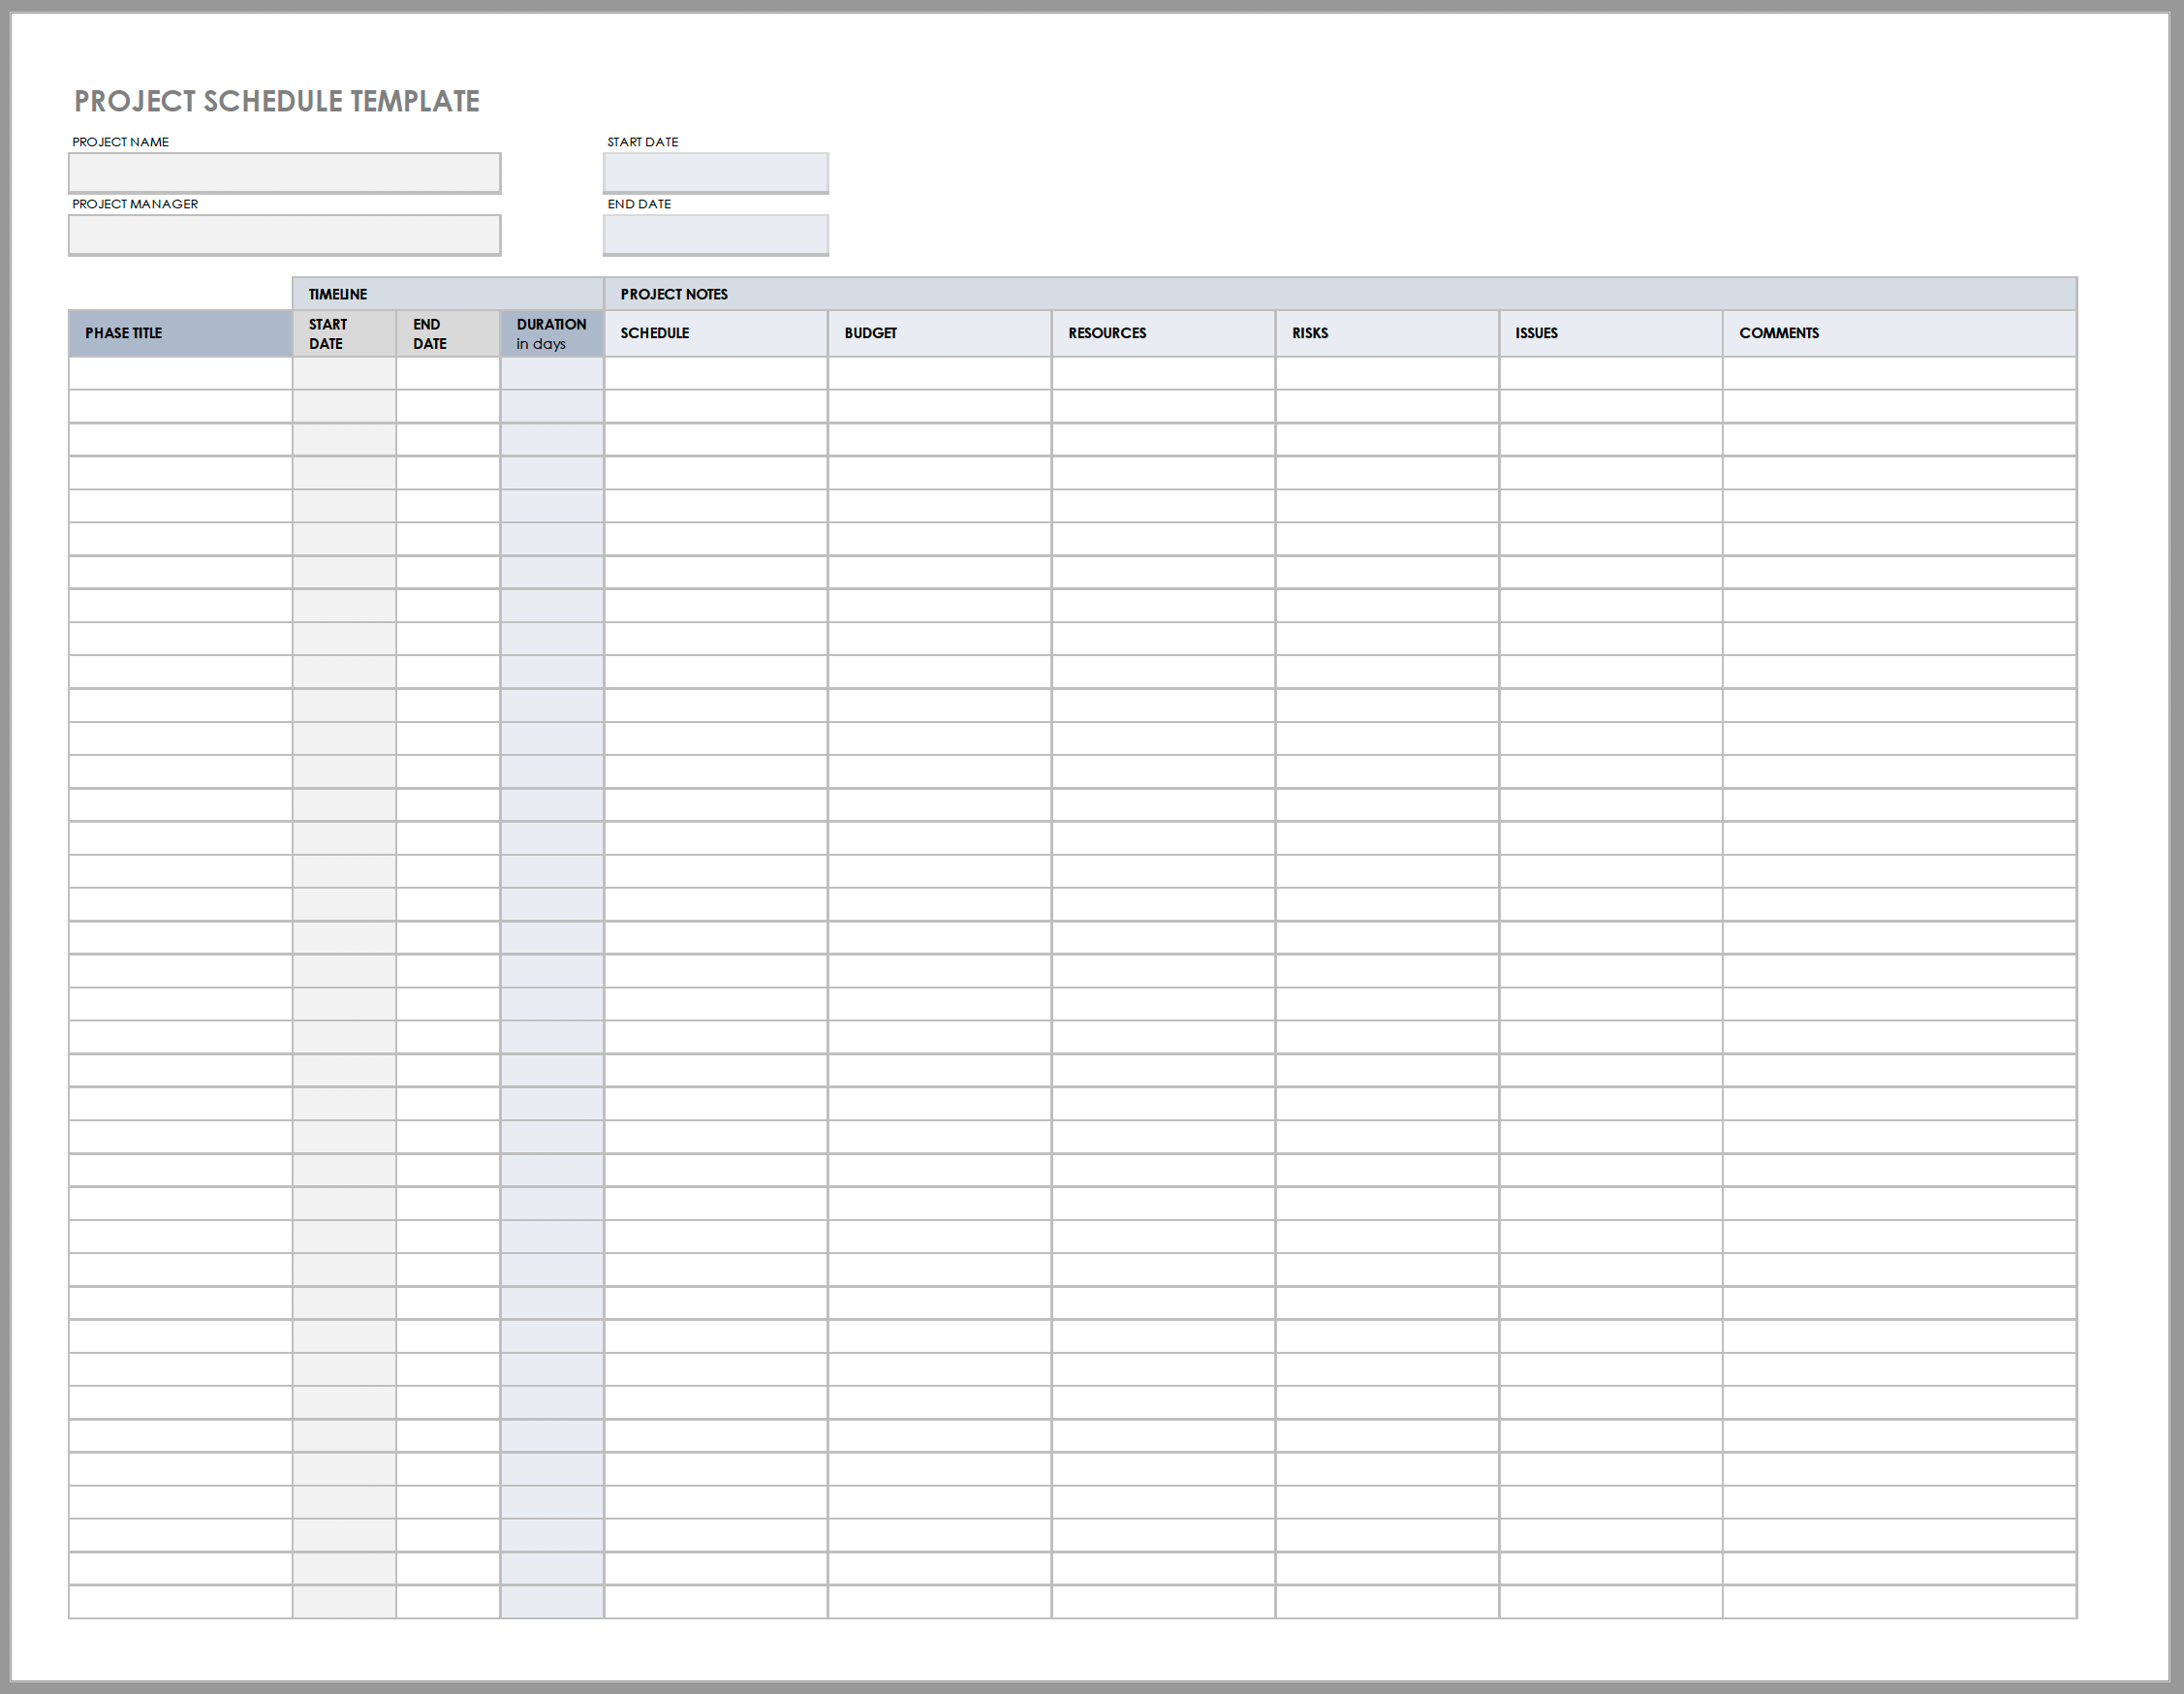 Daily Work Log Template from www.smartsheet.com